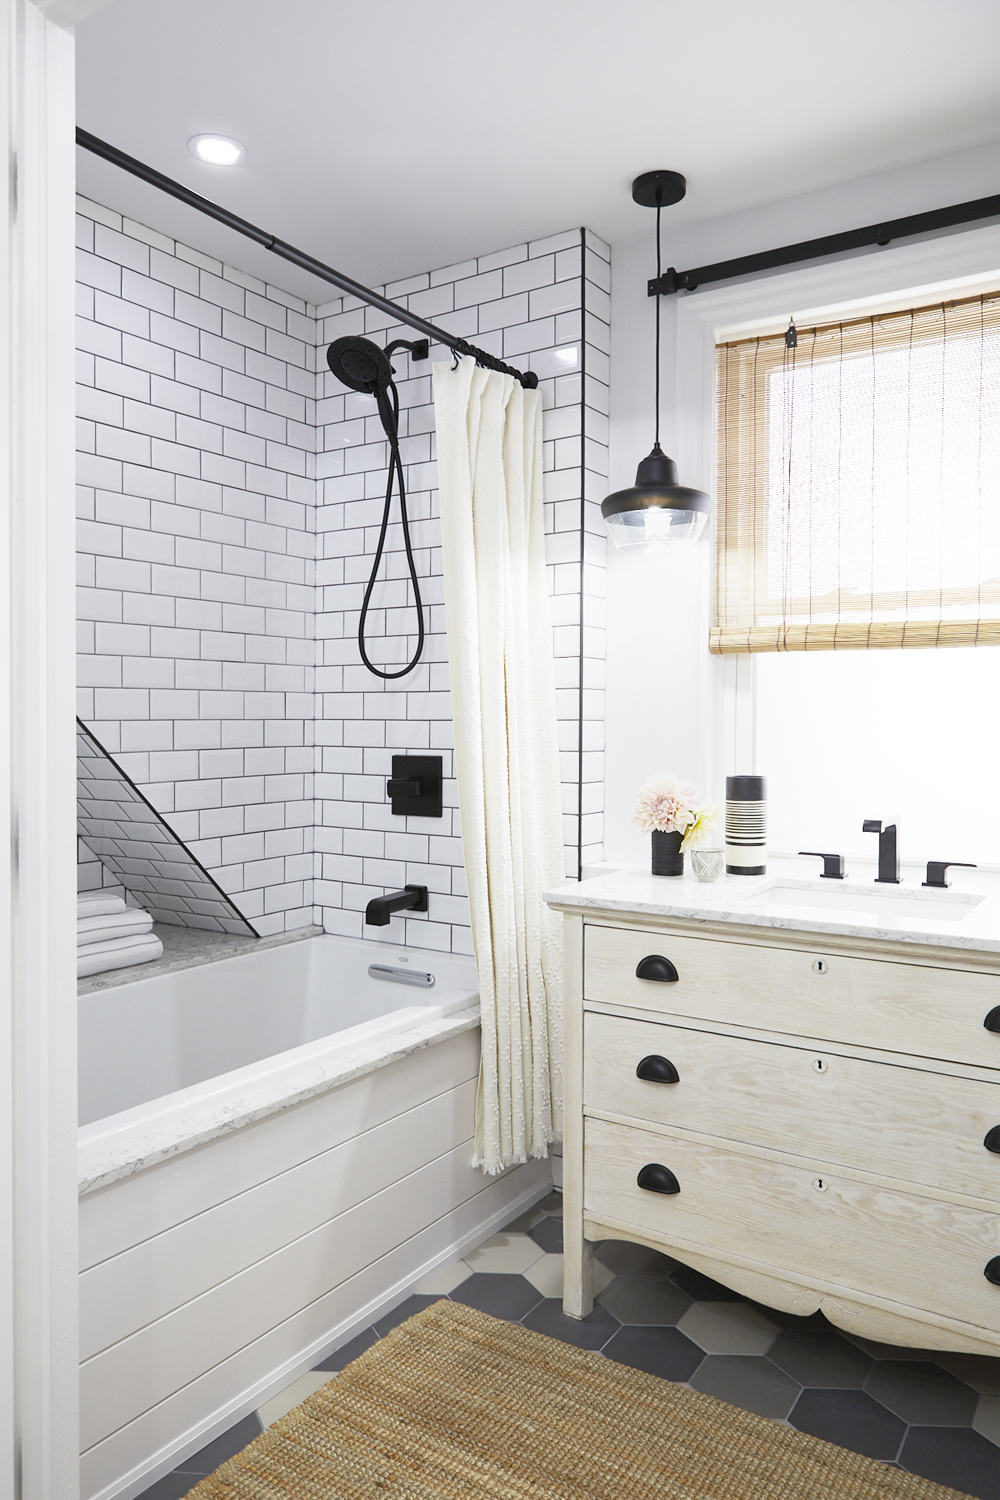 A classic subway tile in the shower of a renovated monochromatic bathroom